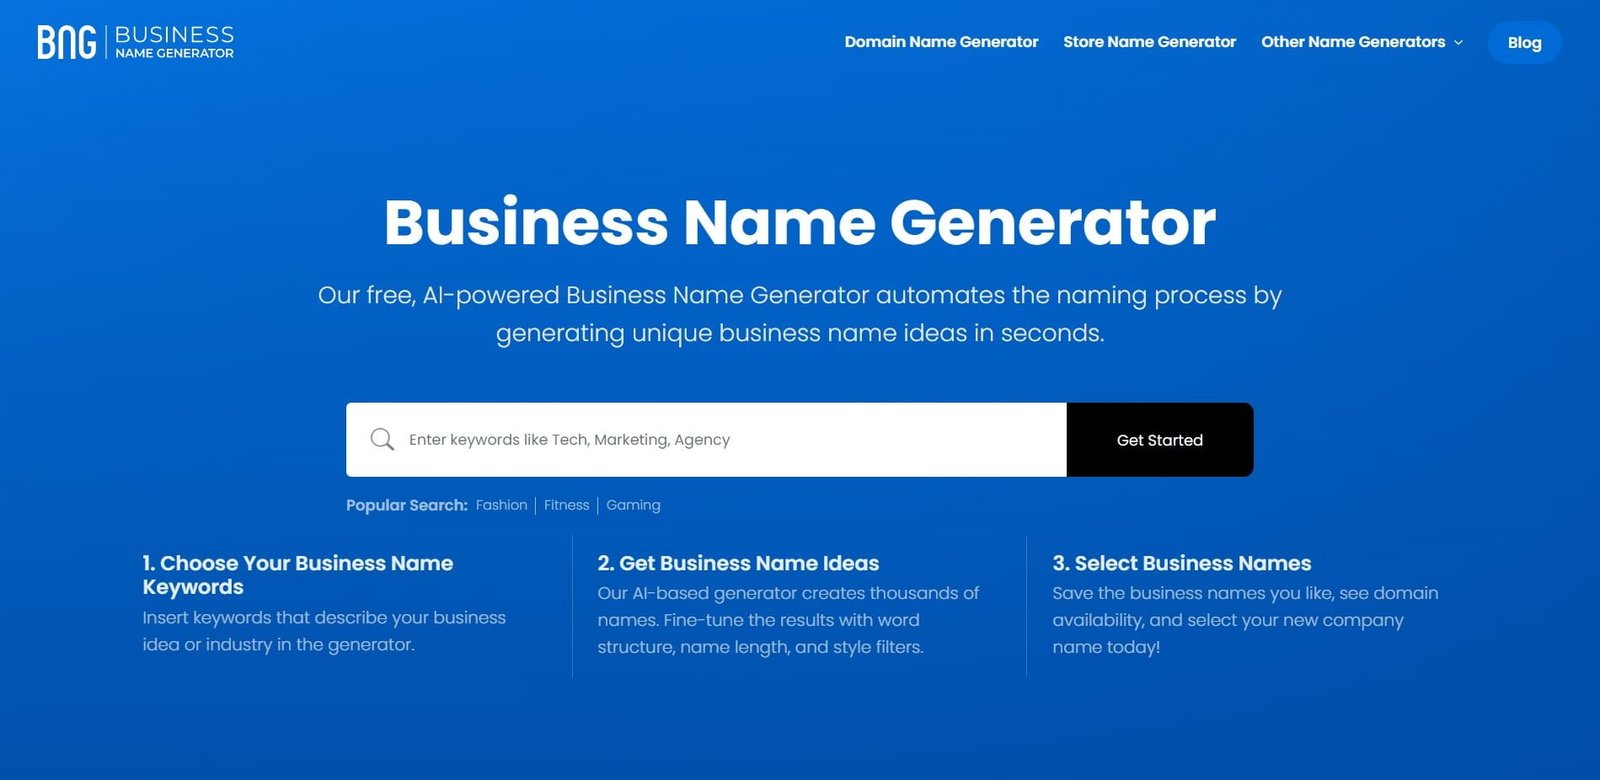 BNG is an AI name generator to produce business name ideas in seconds. You can also check for domain availability on the website.